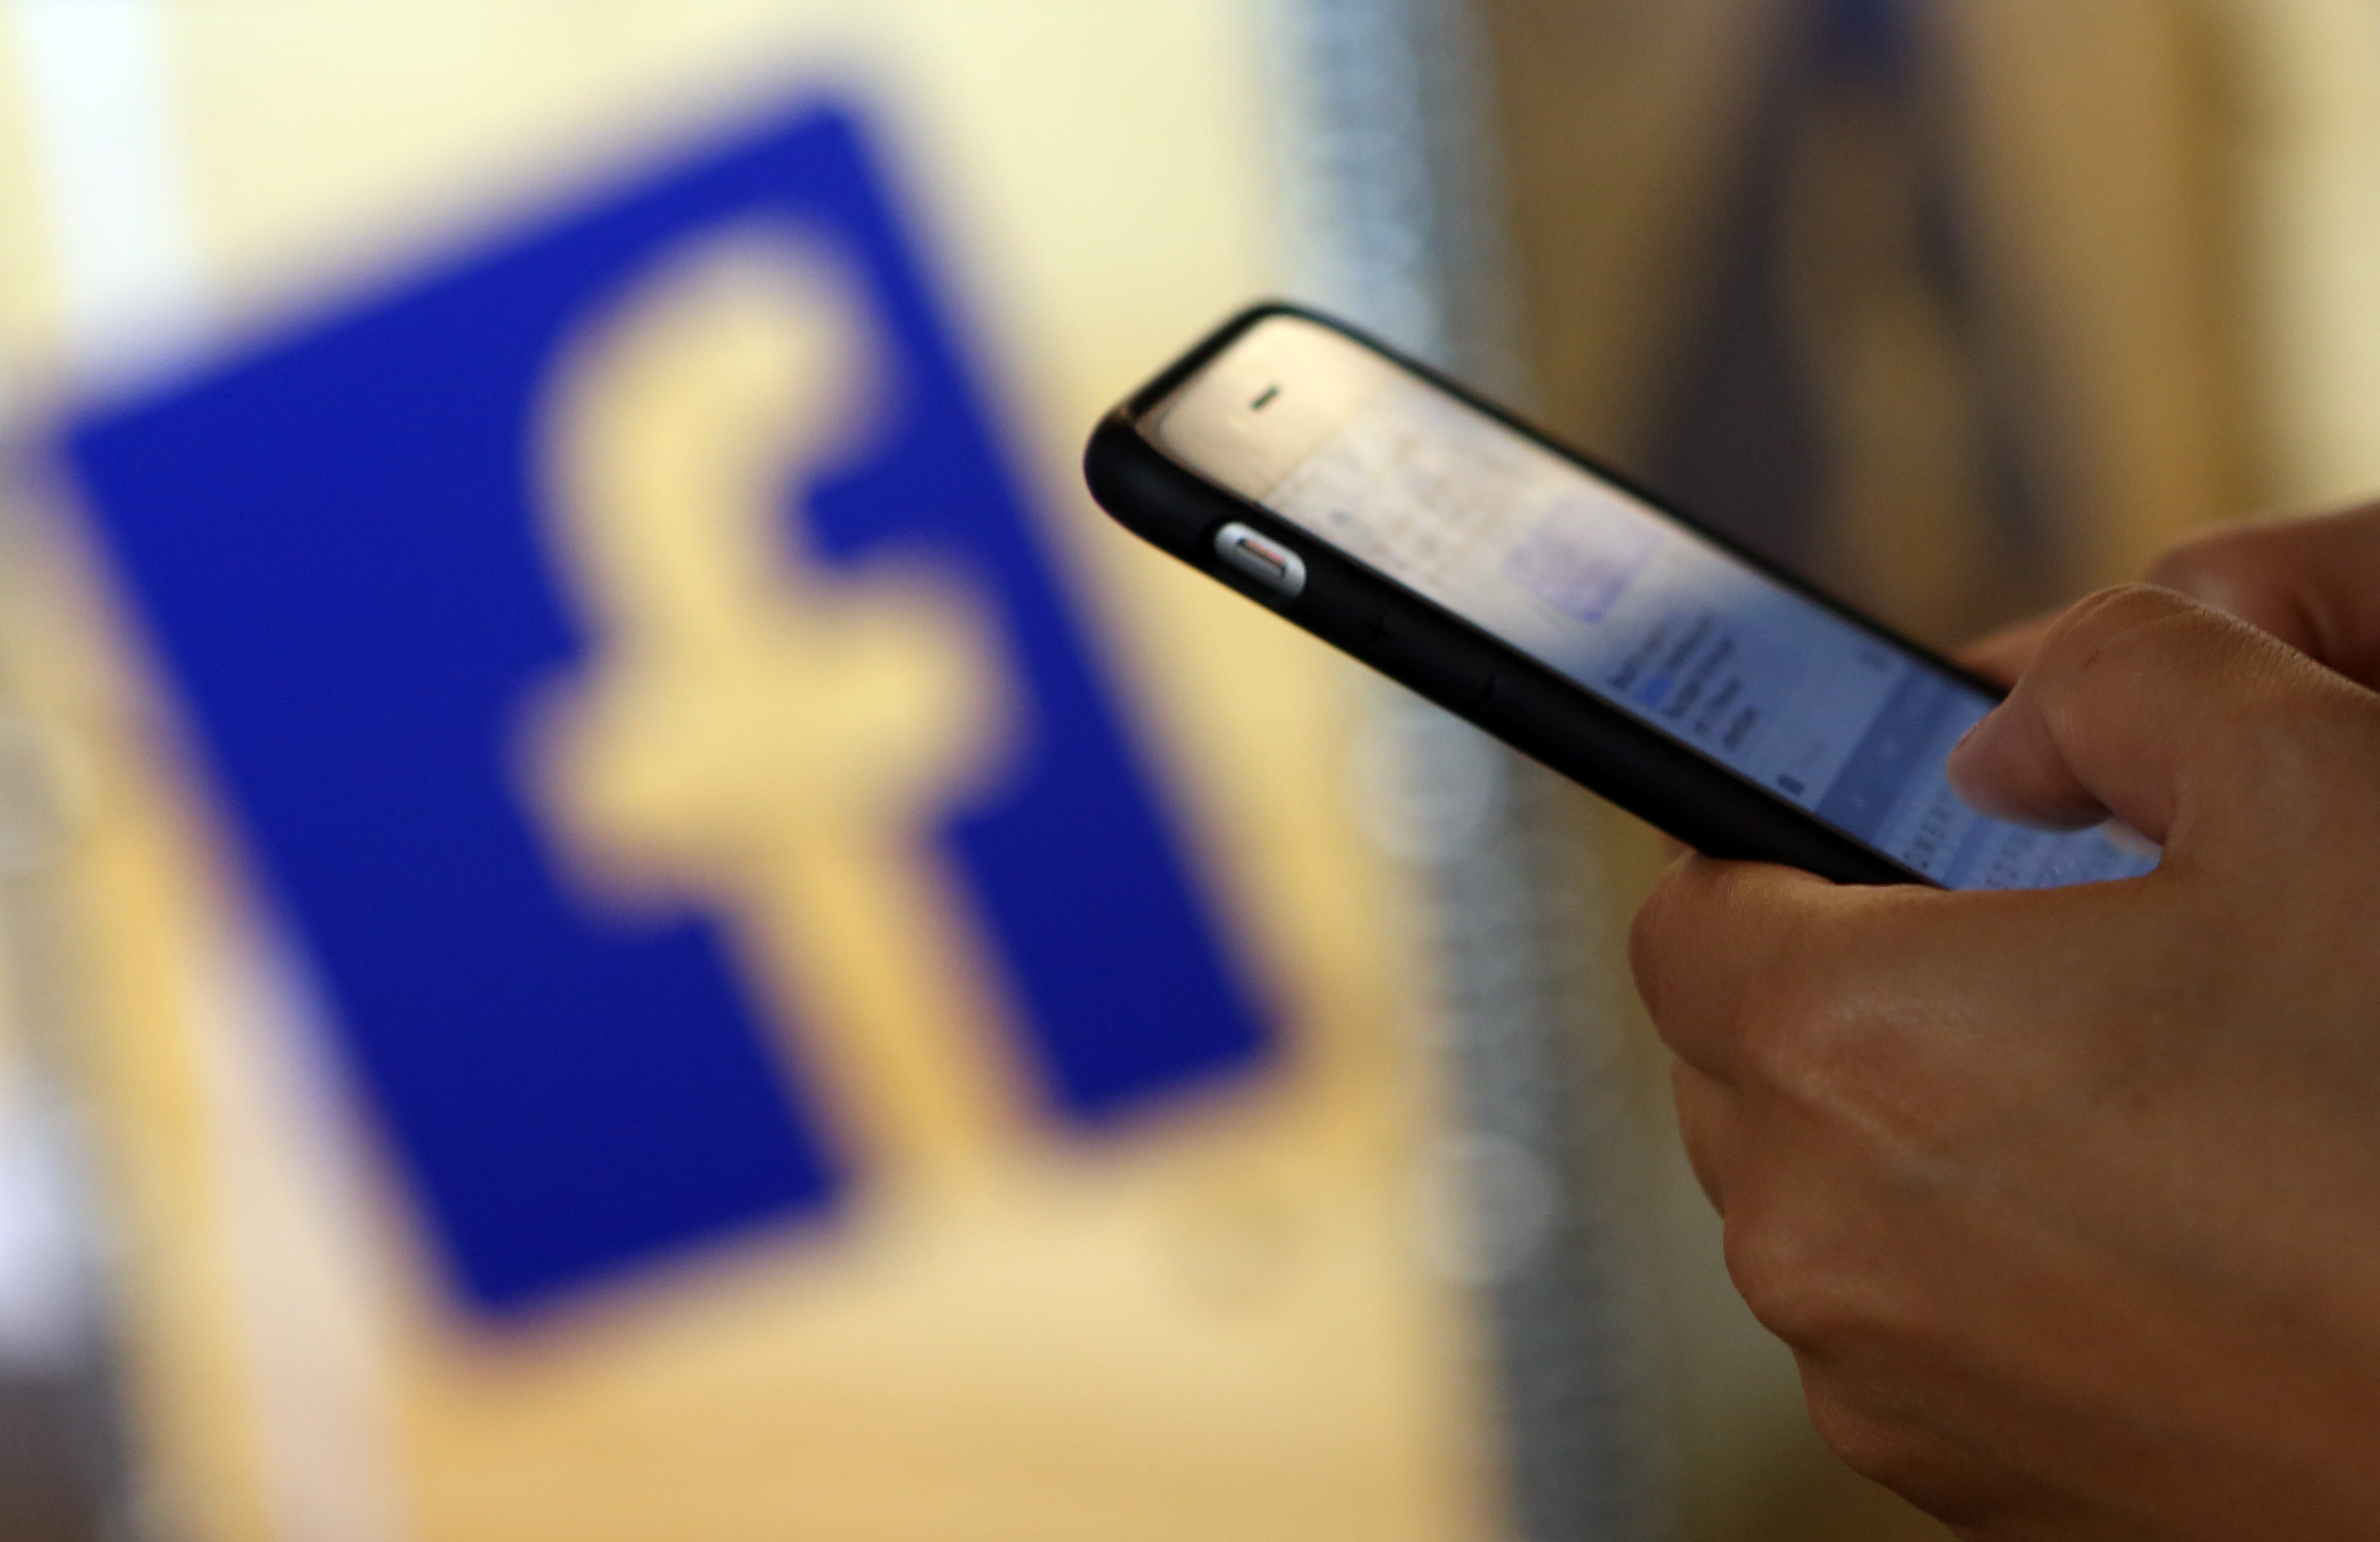 A visitor uses a mobile phone in front of the Facebook logo on Sept. 12, 2015. (Adam Berry—Getty Images)